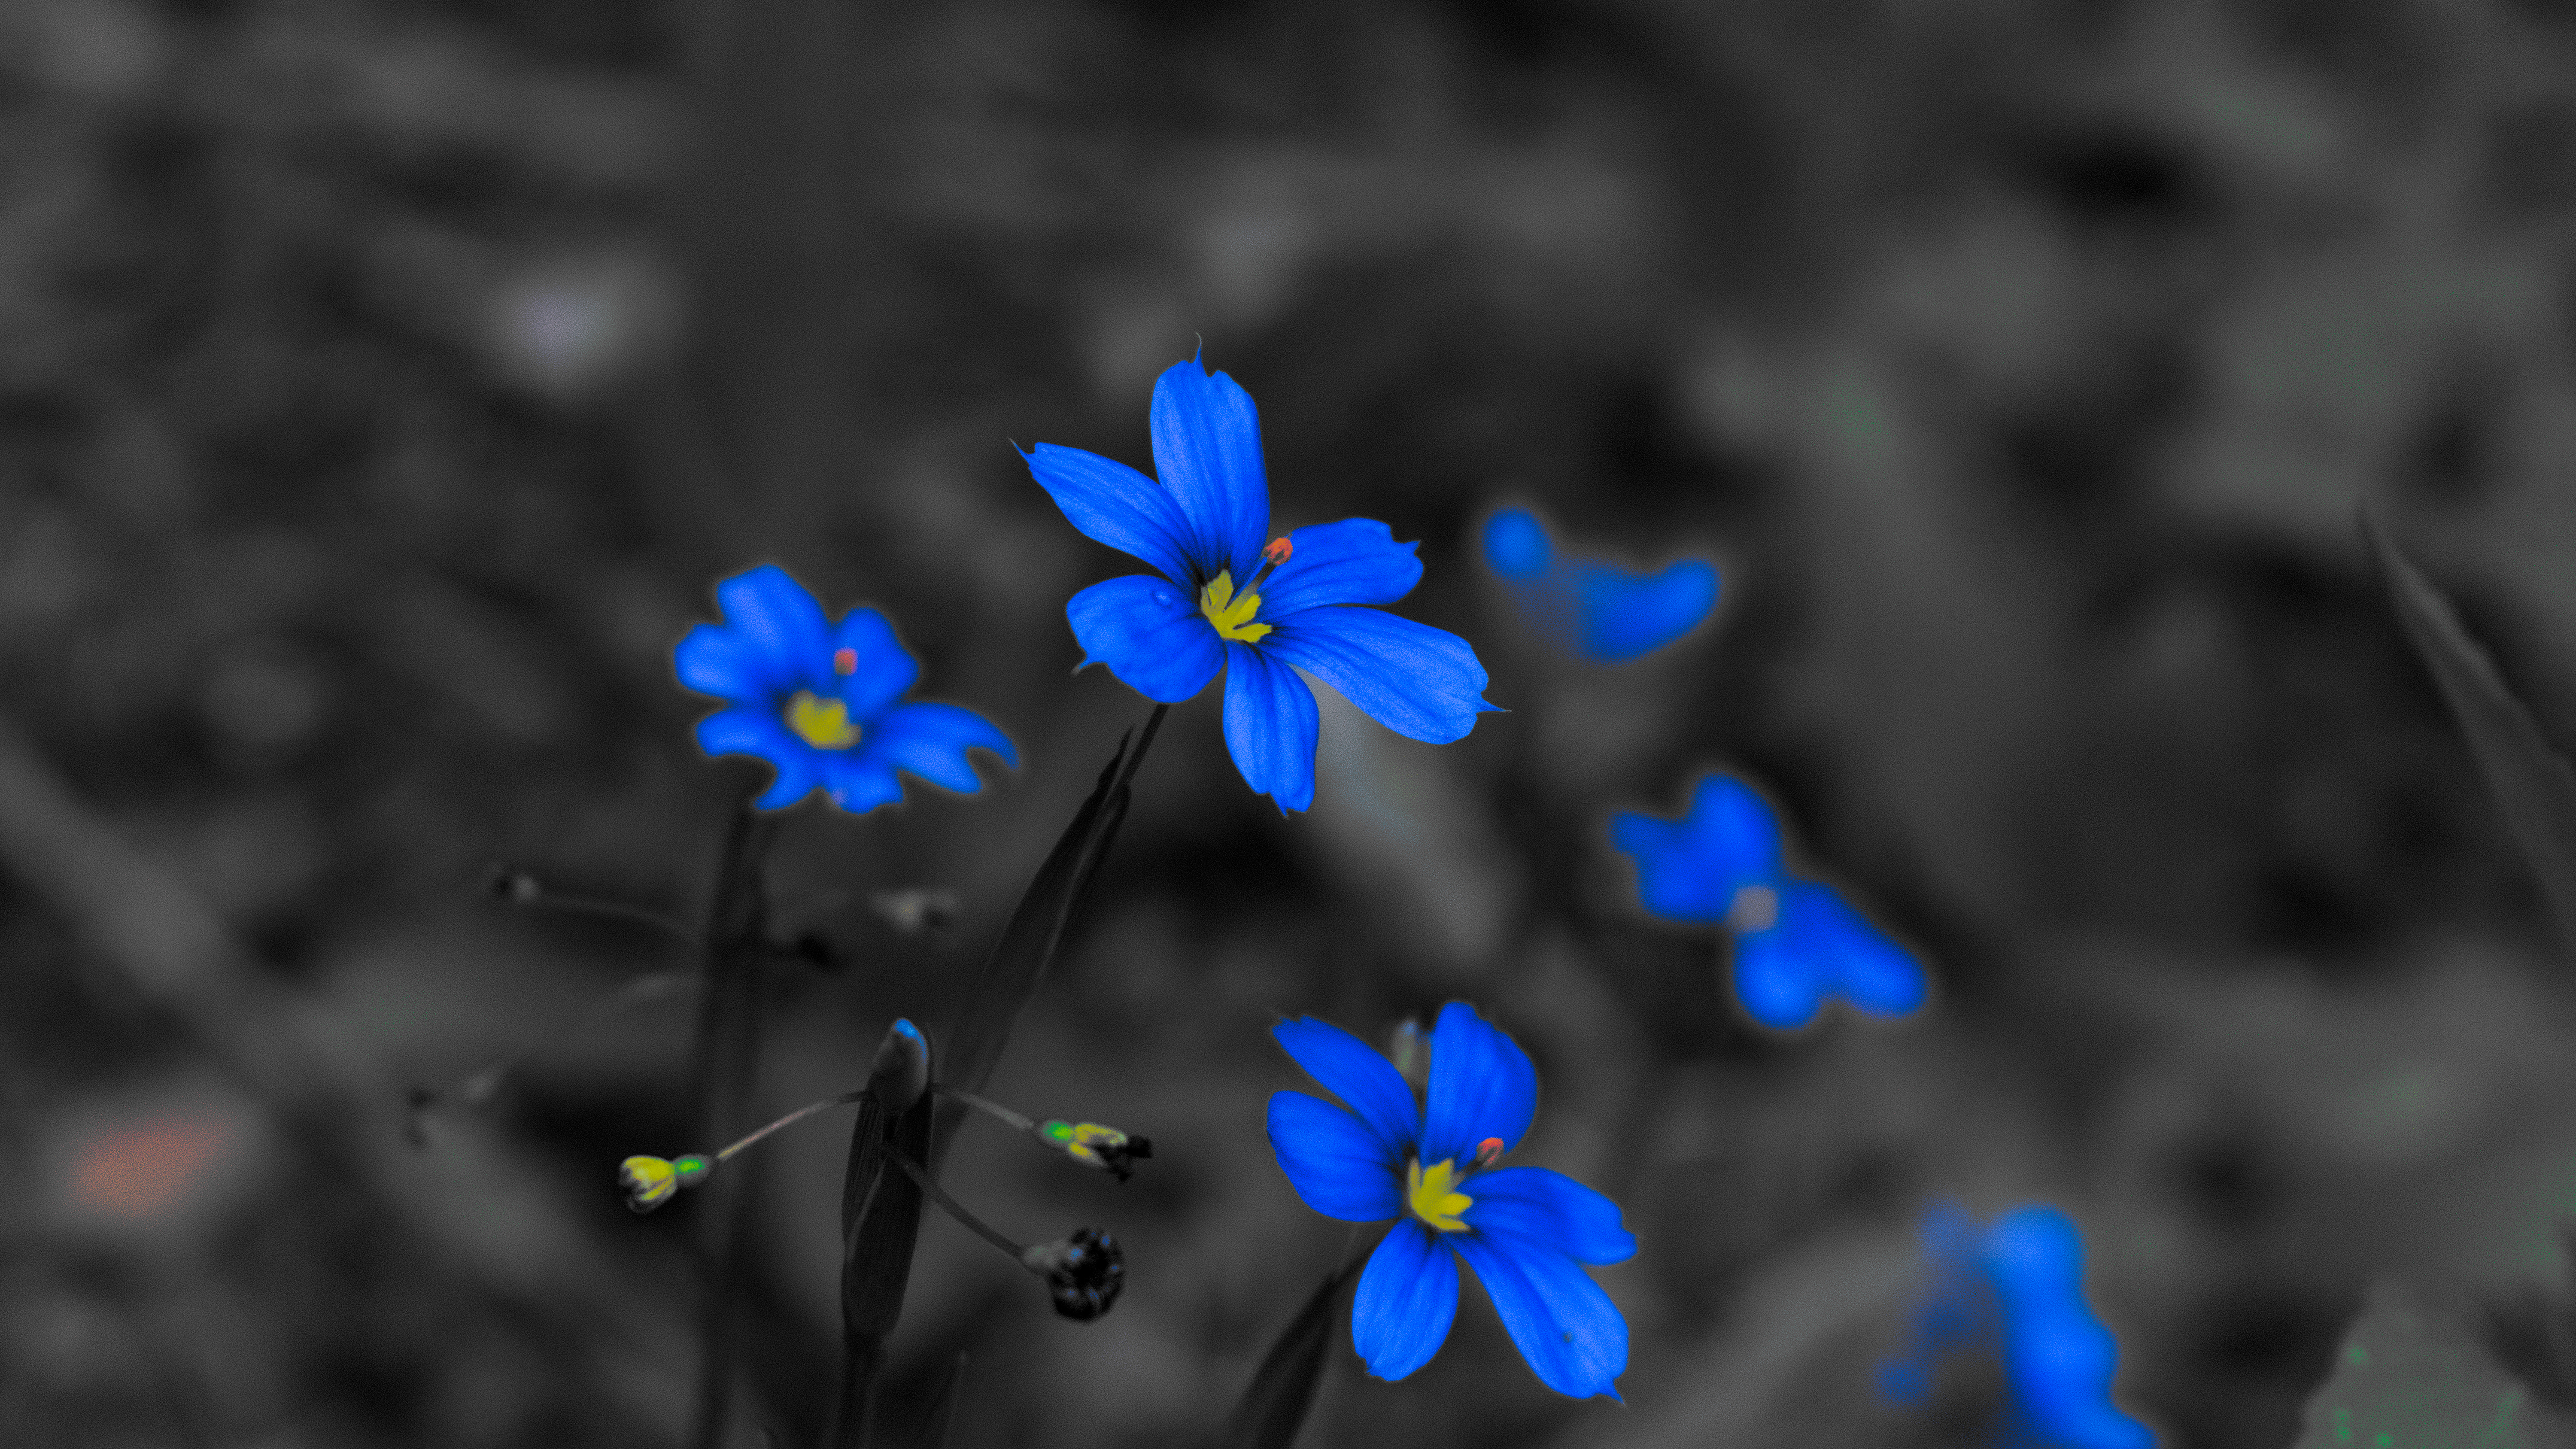 Blue Flowers Nature Flowers Blue Selective Coloring Macro Blurry Background Blurred Petals Minimalis 6000x3375